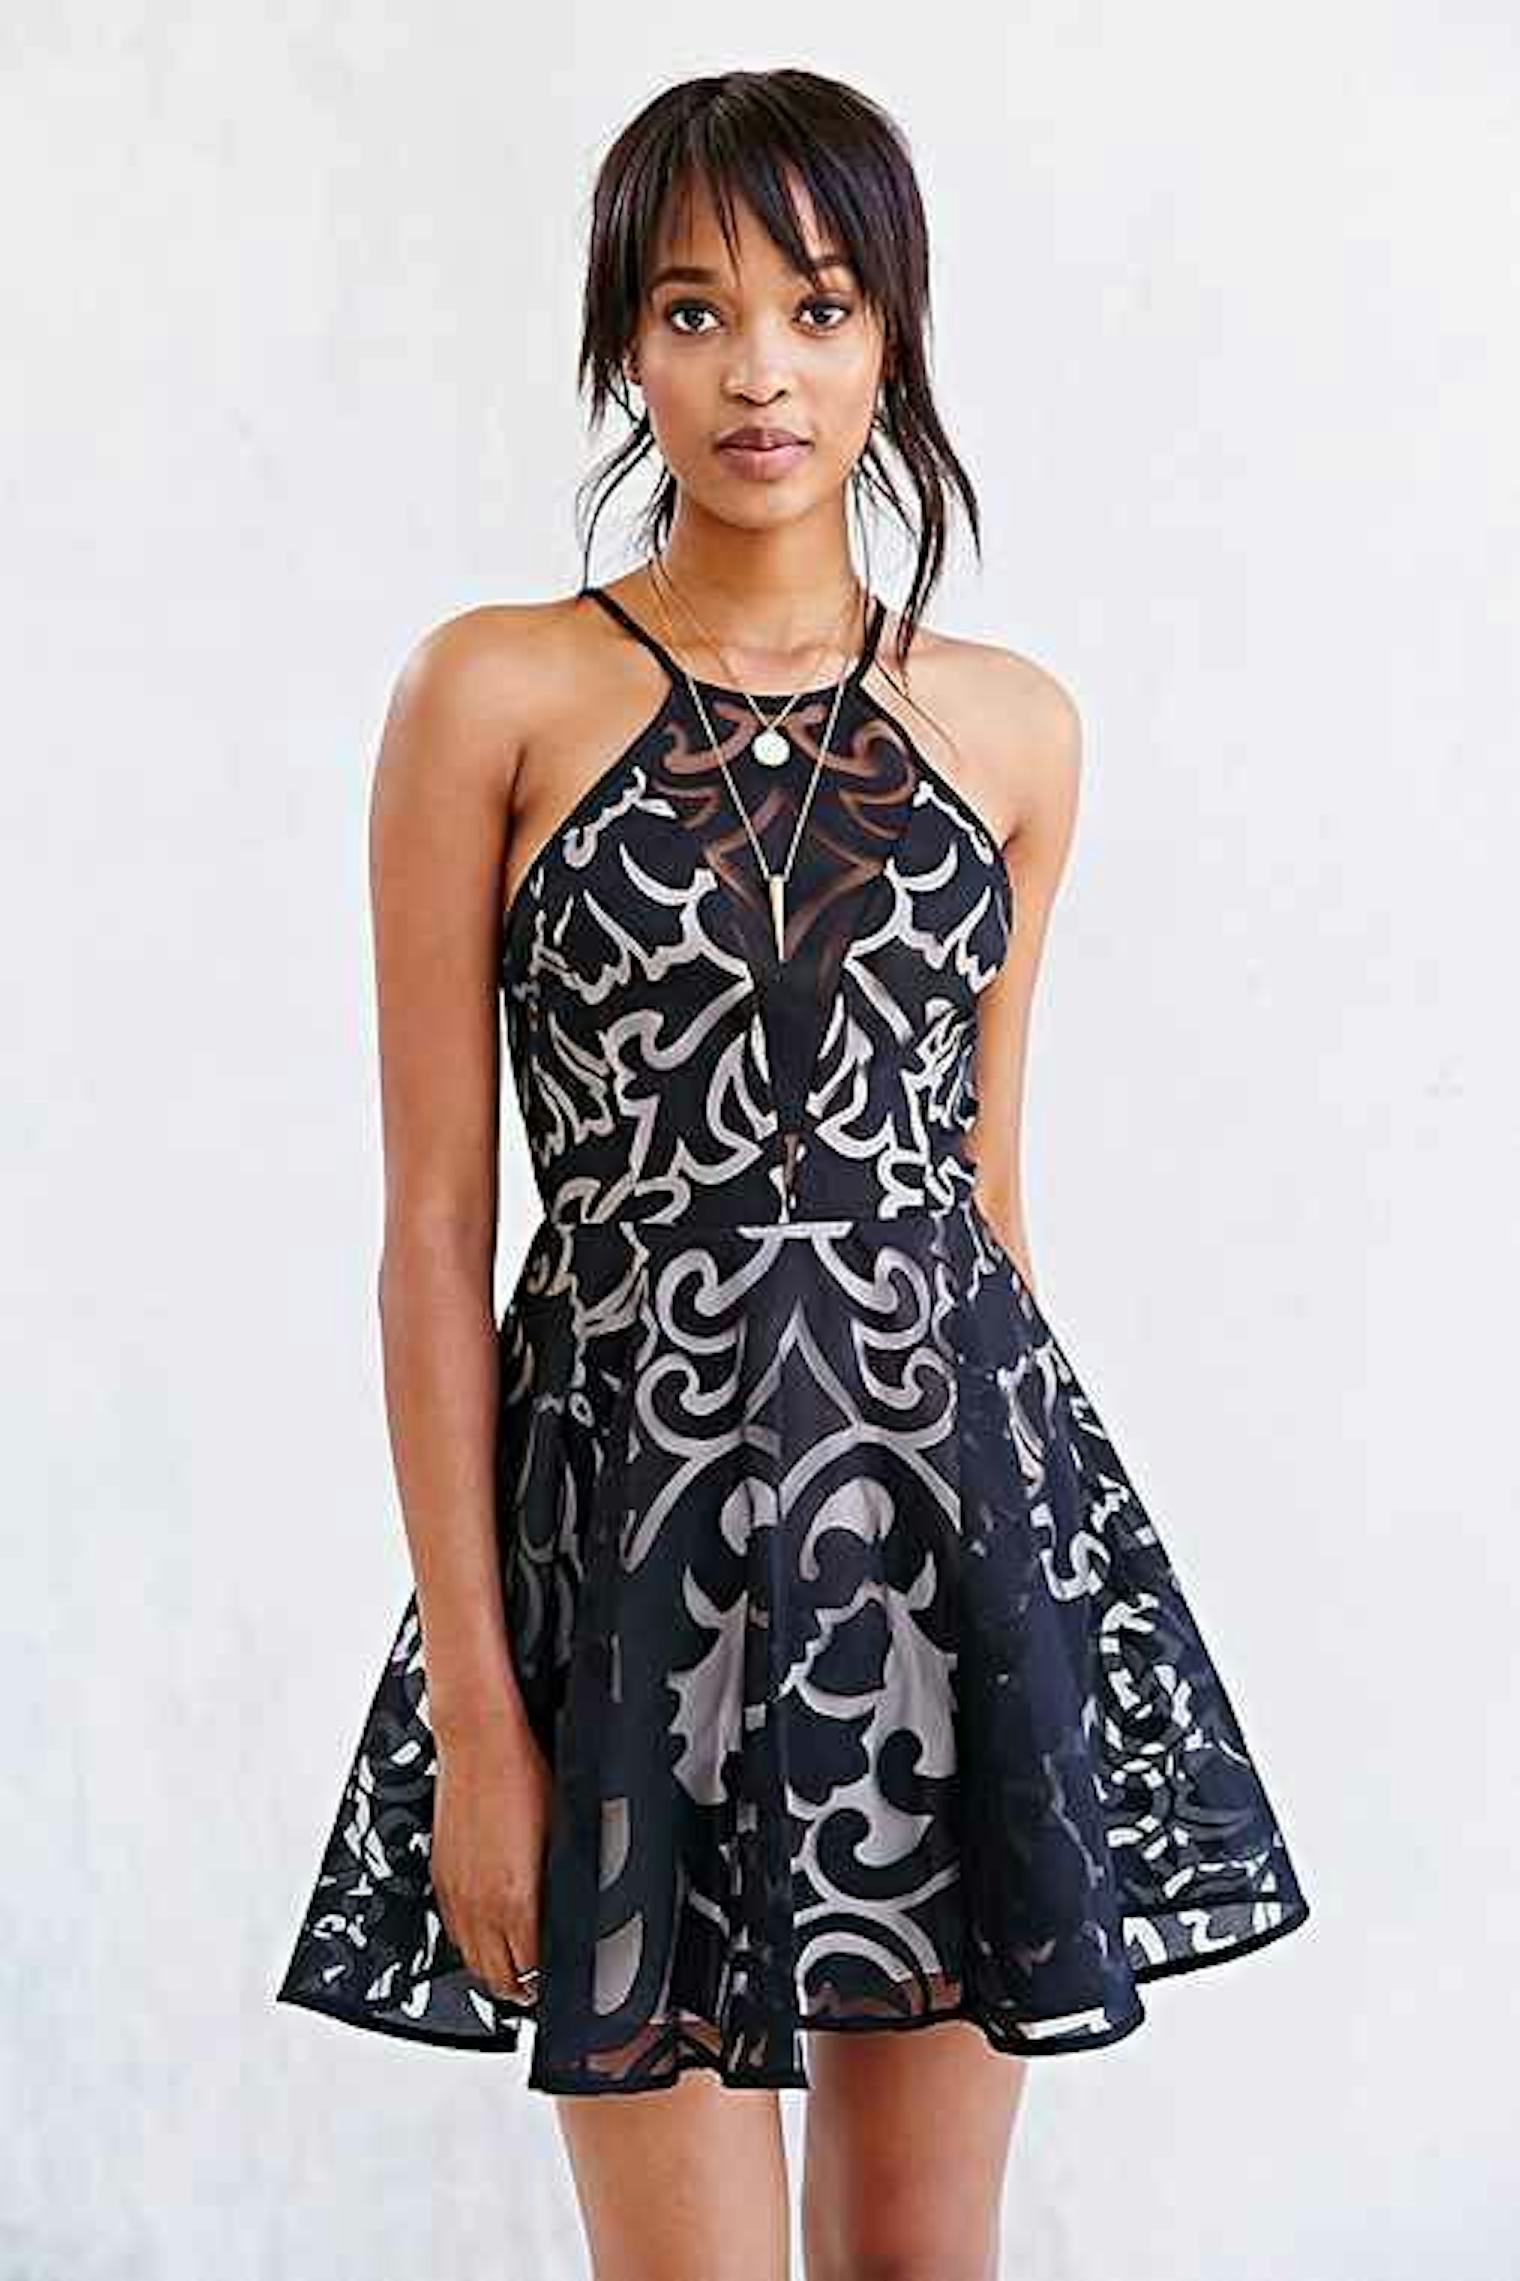 Homecoming Dress Inspiration From Fashion Week: Where To Snag Designer ...